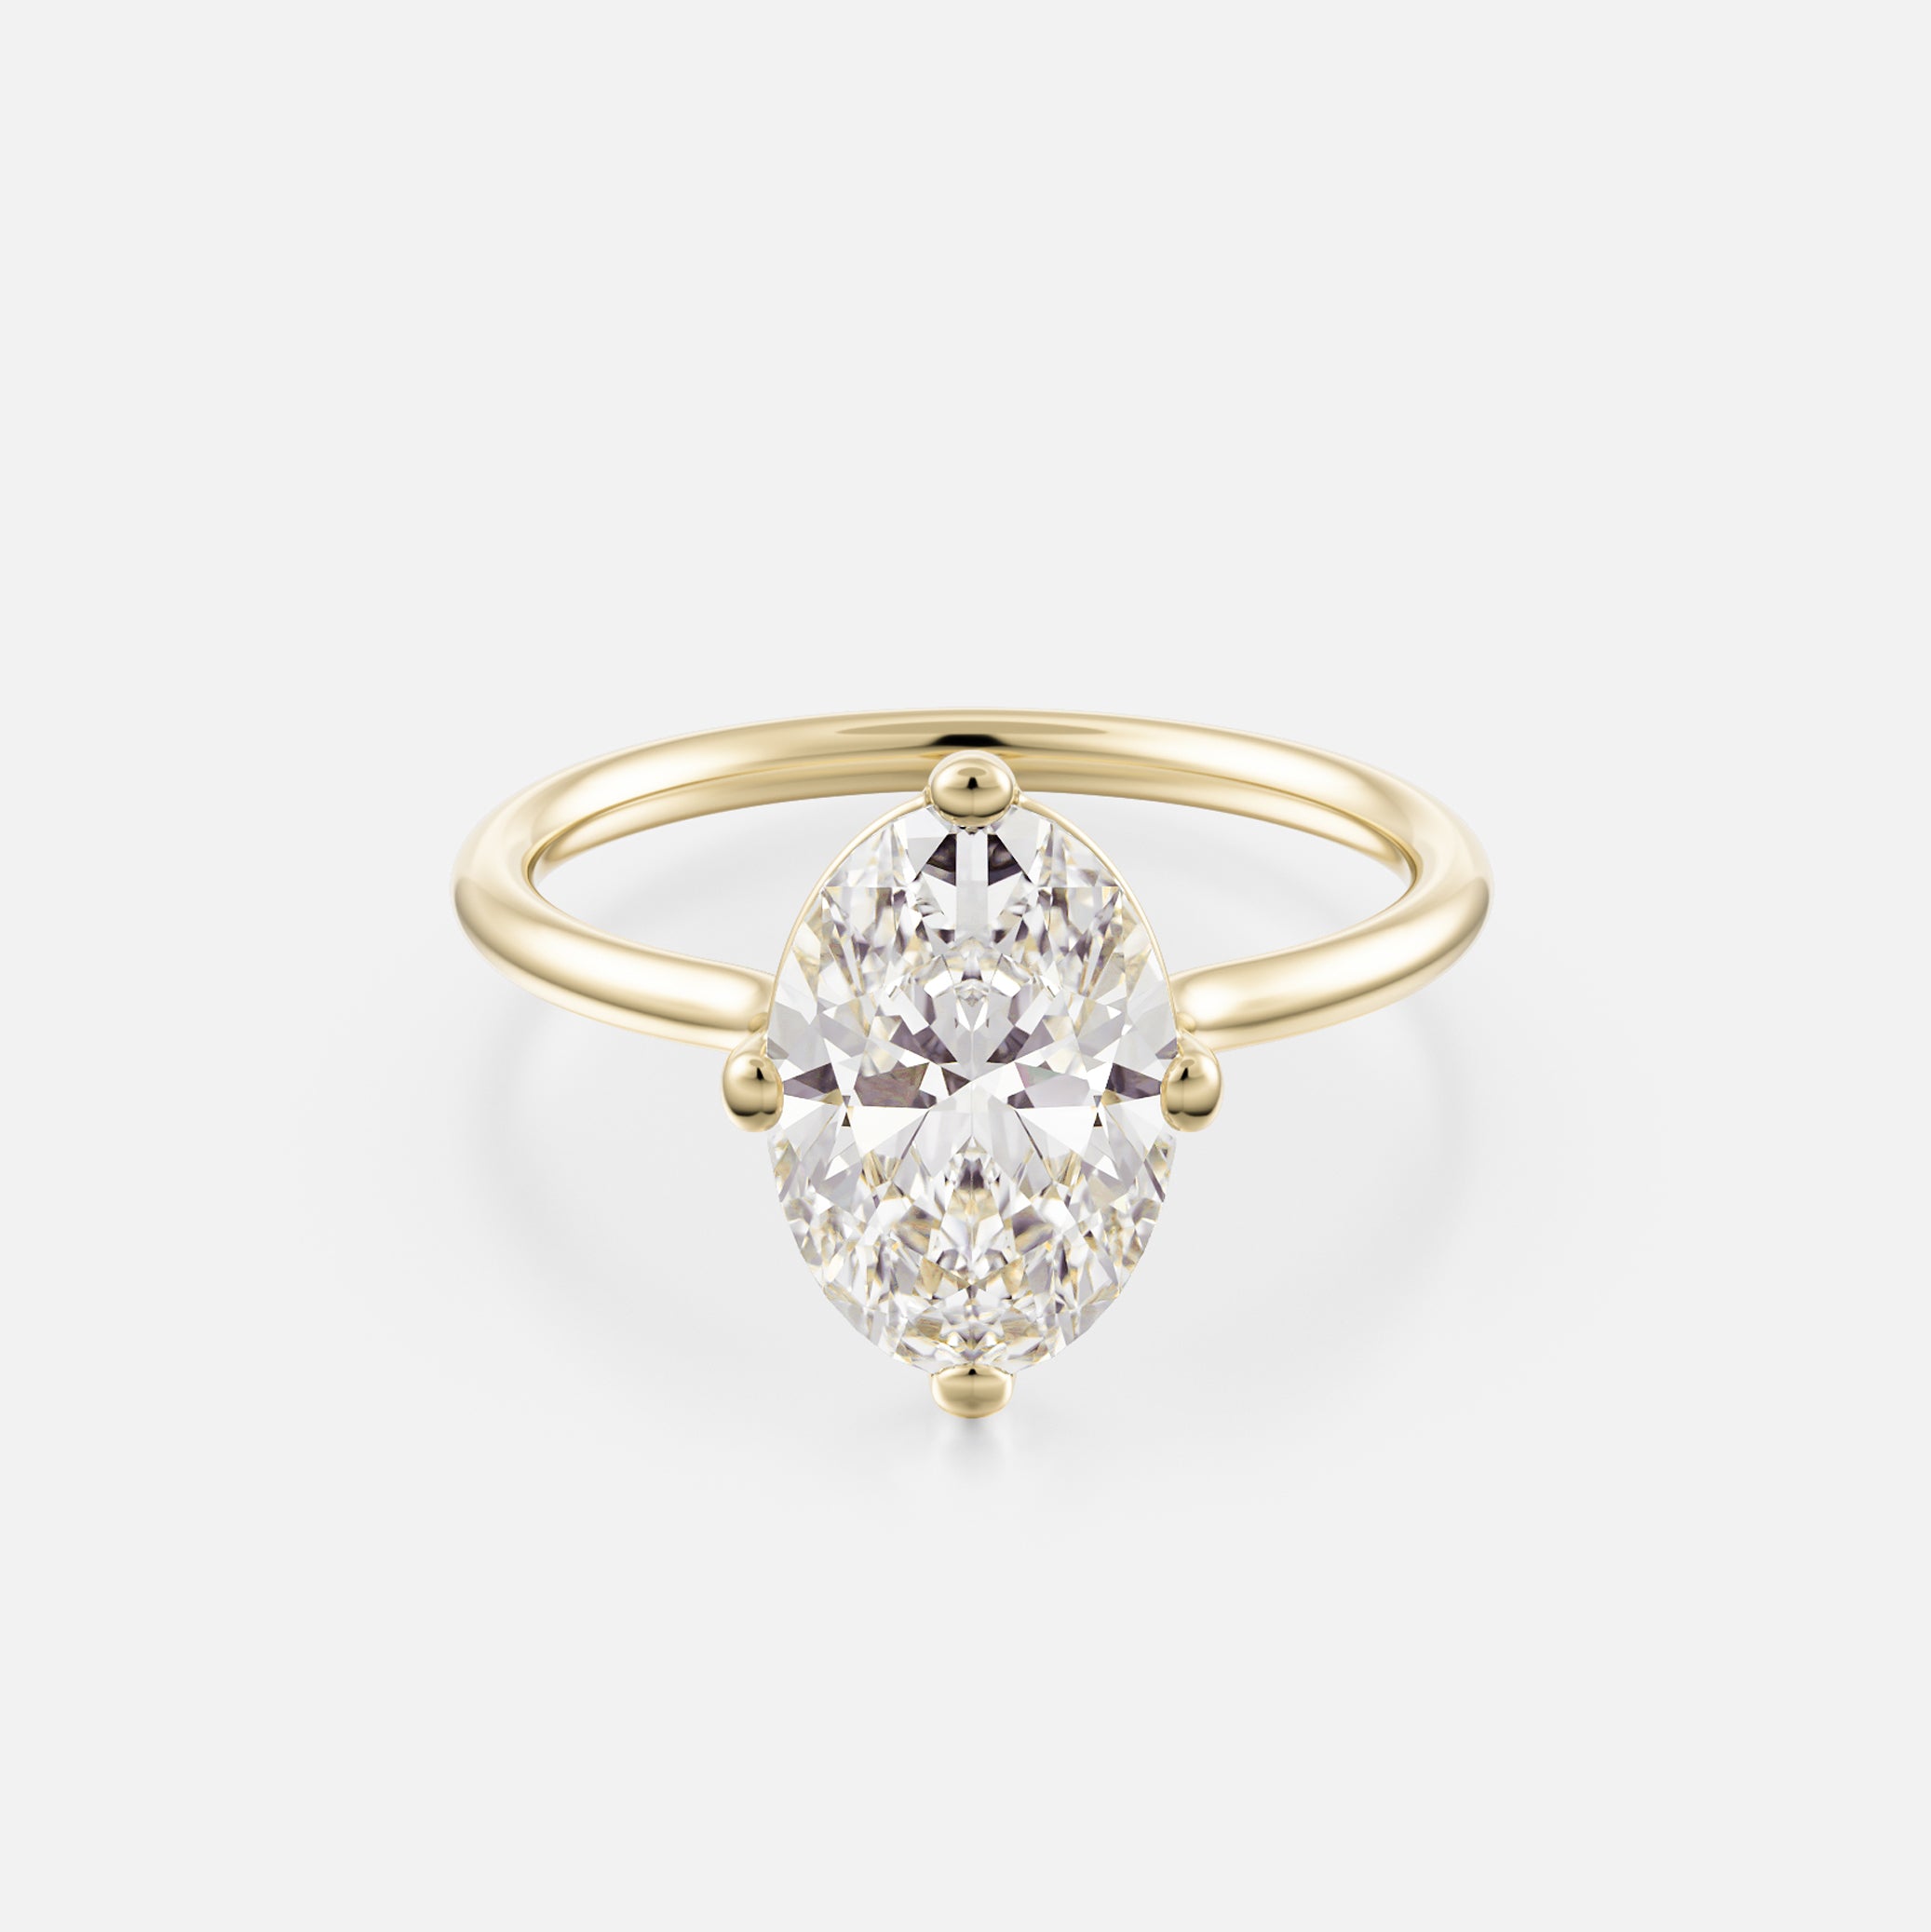 Veli Round Band with North South Oval Simple Engagement Ring Setting in 14 karat Gold or platinum by SHW Fine Jewelry New York City